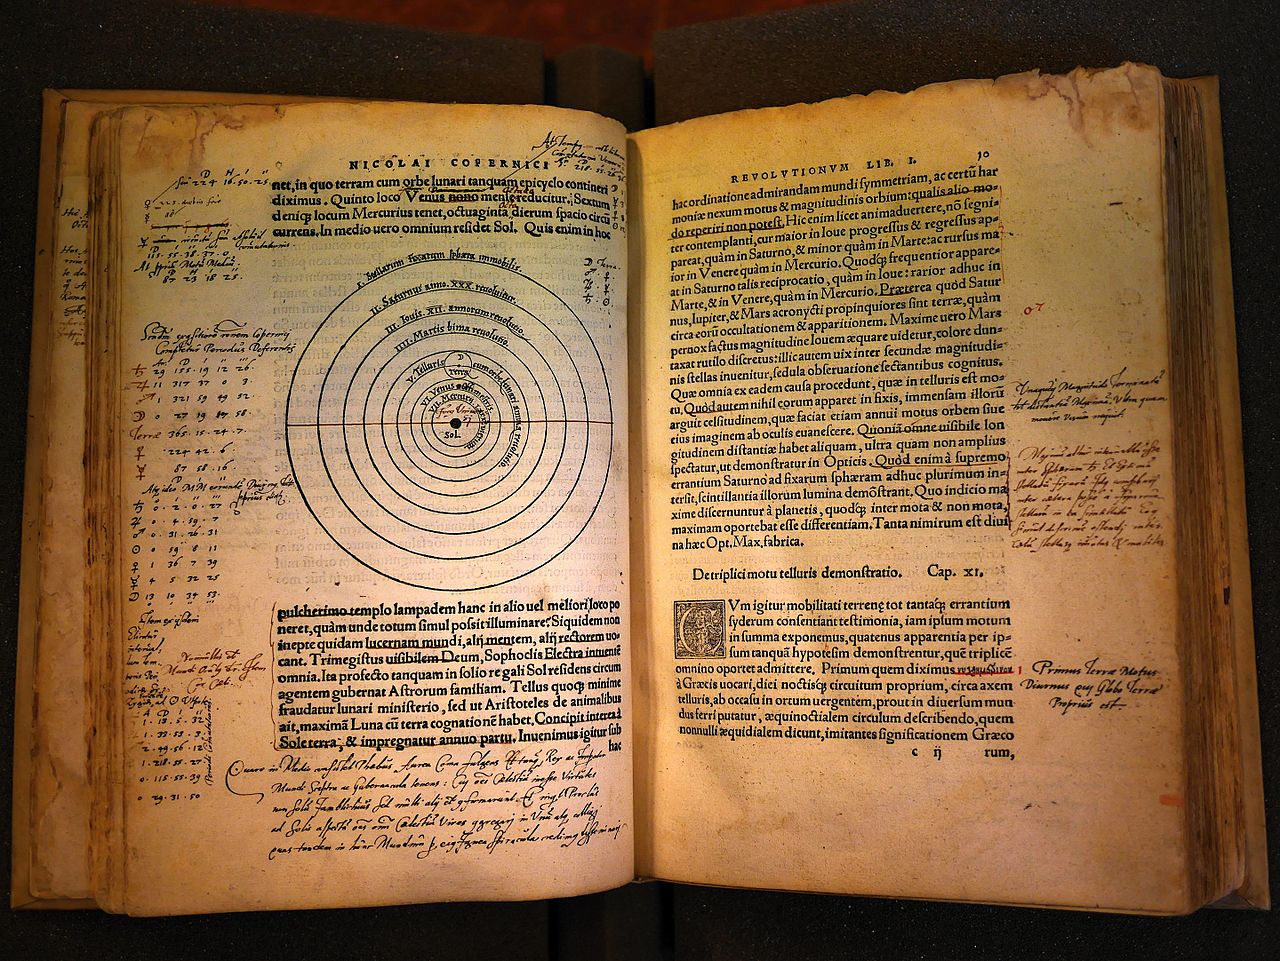 Two pages from a historical scientific text including margin notes and a figure depicting orbital bodies as concentric circles.